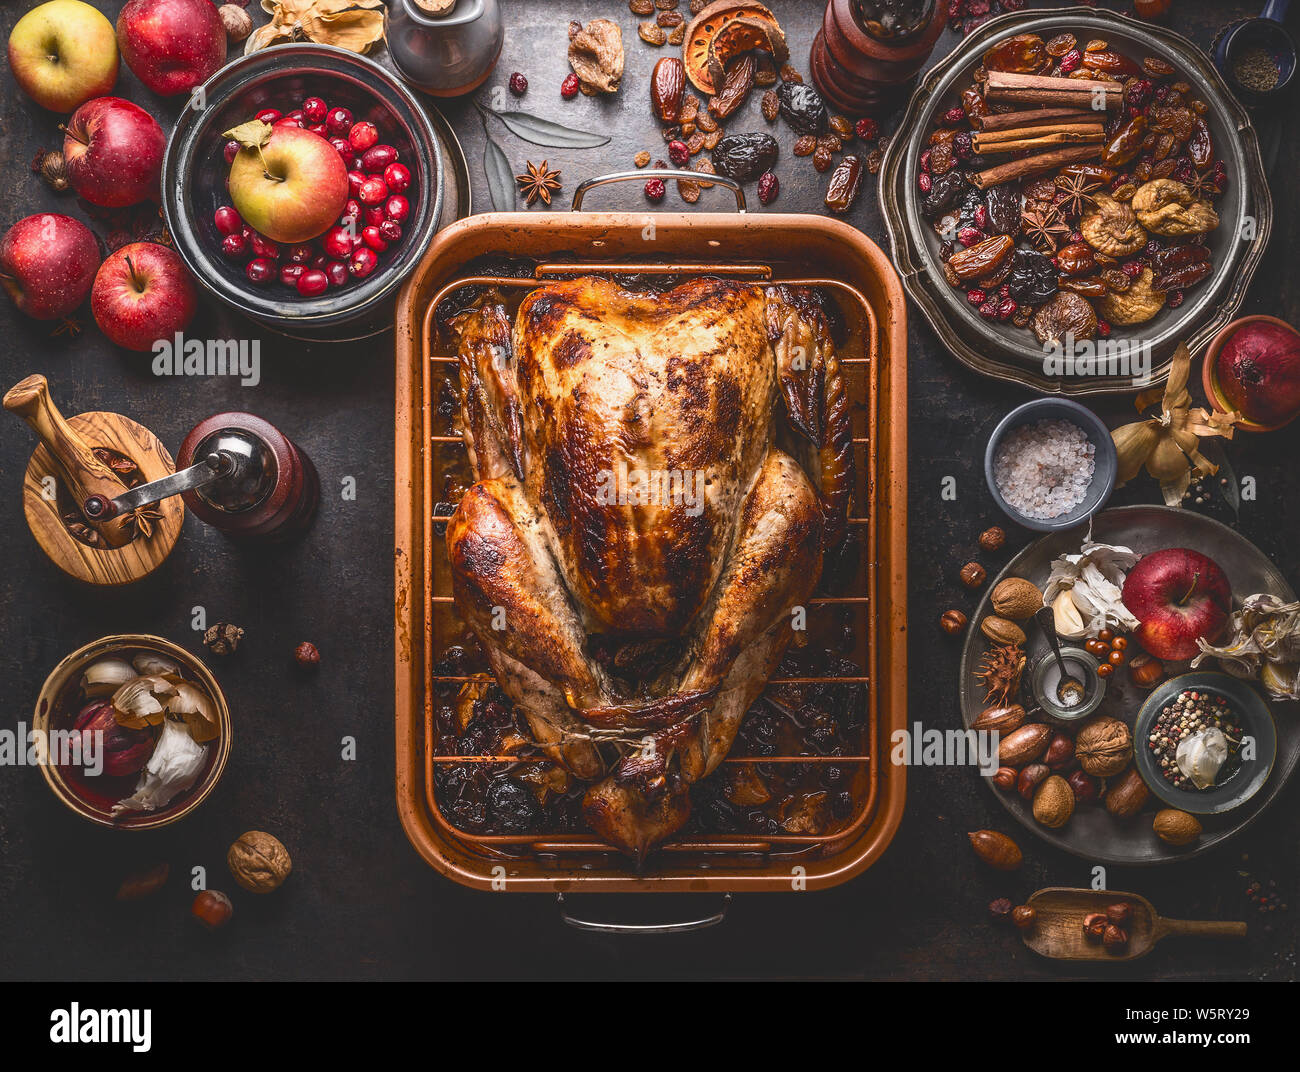 Whole roasted stuffed turkey in baking tray to Thanksgiving dinner on kitchen table with various autumn seasonal ingredients: apples, cranberries, var Stock Photo